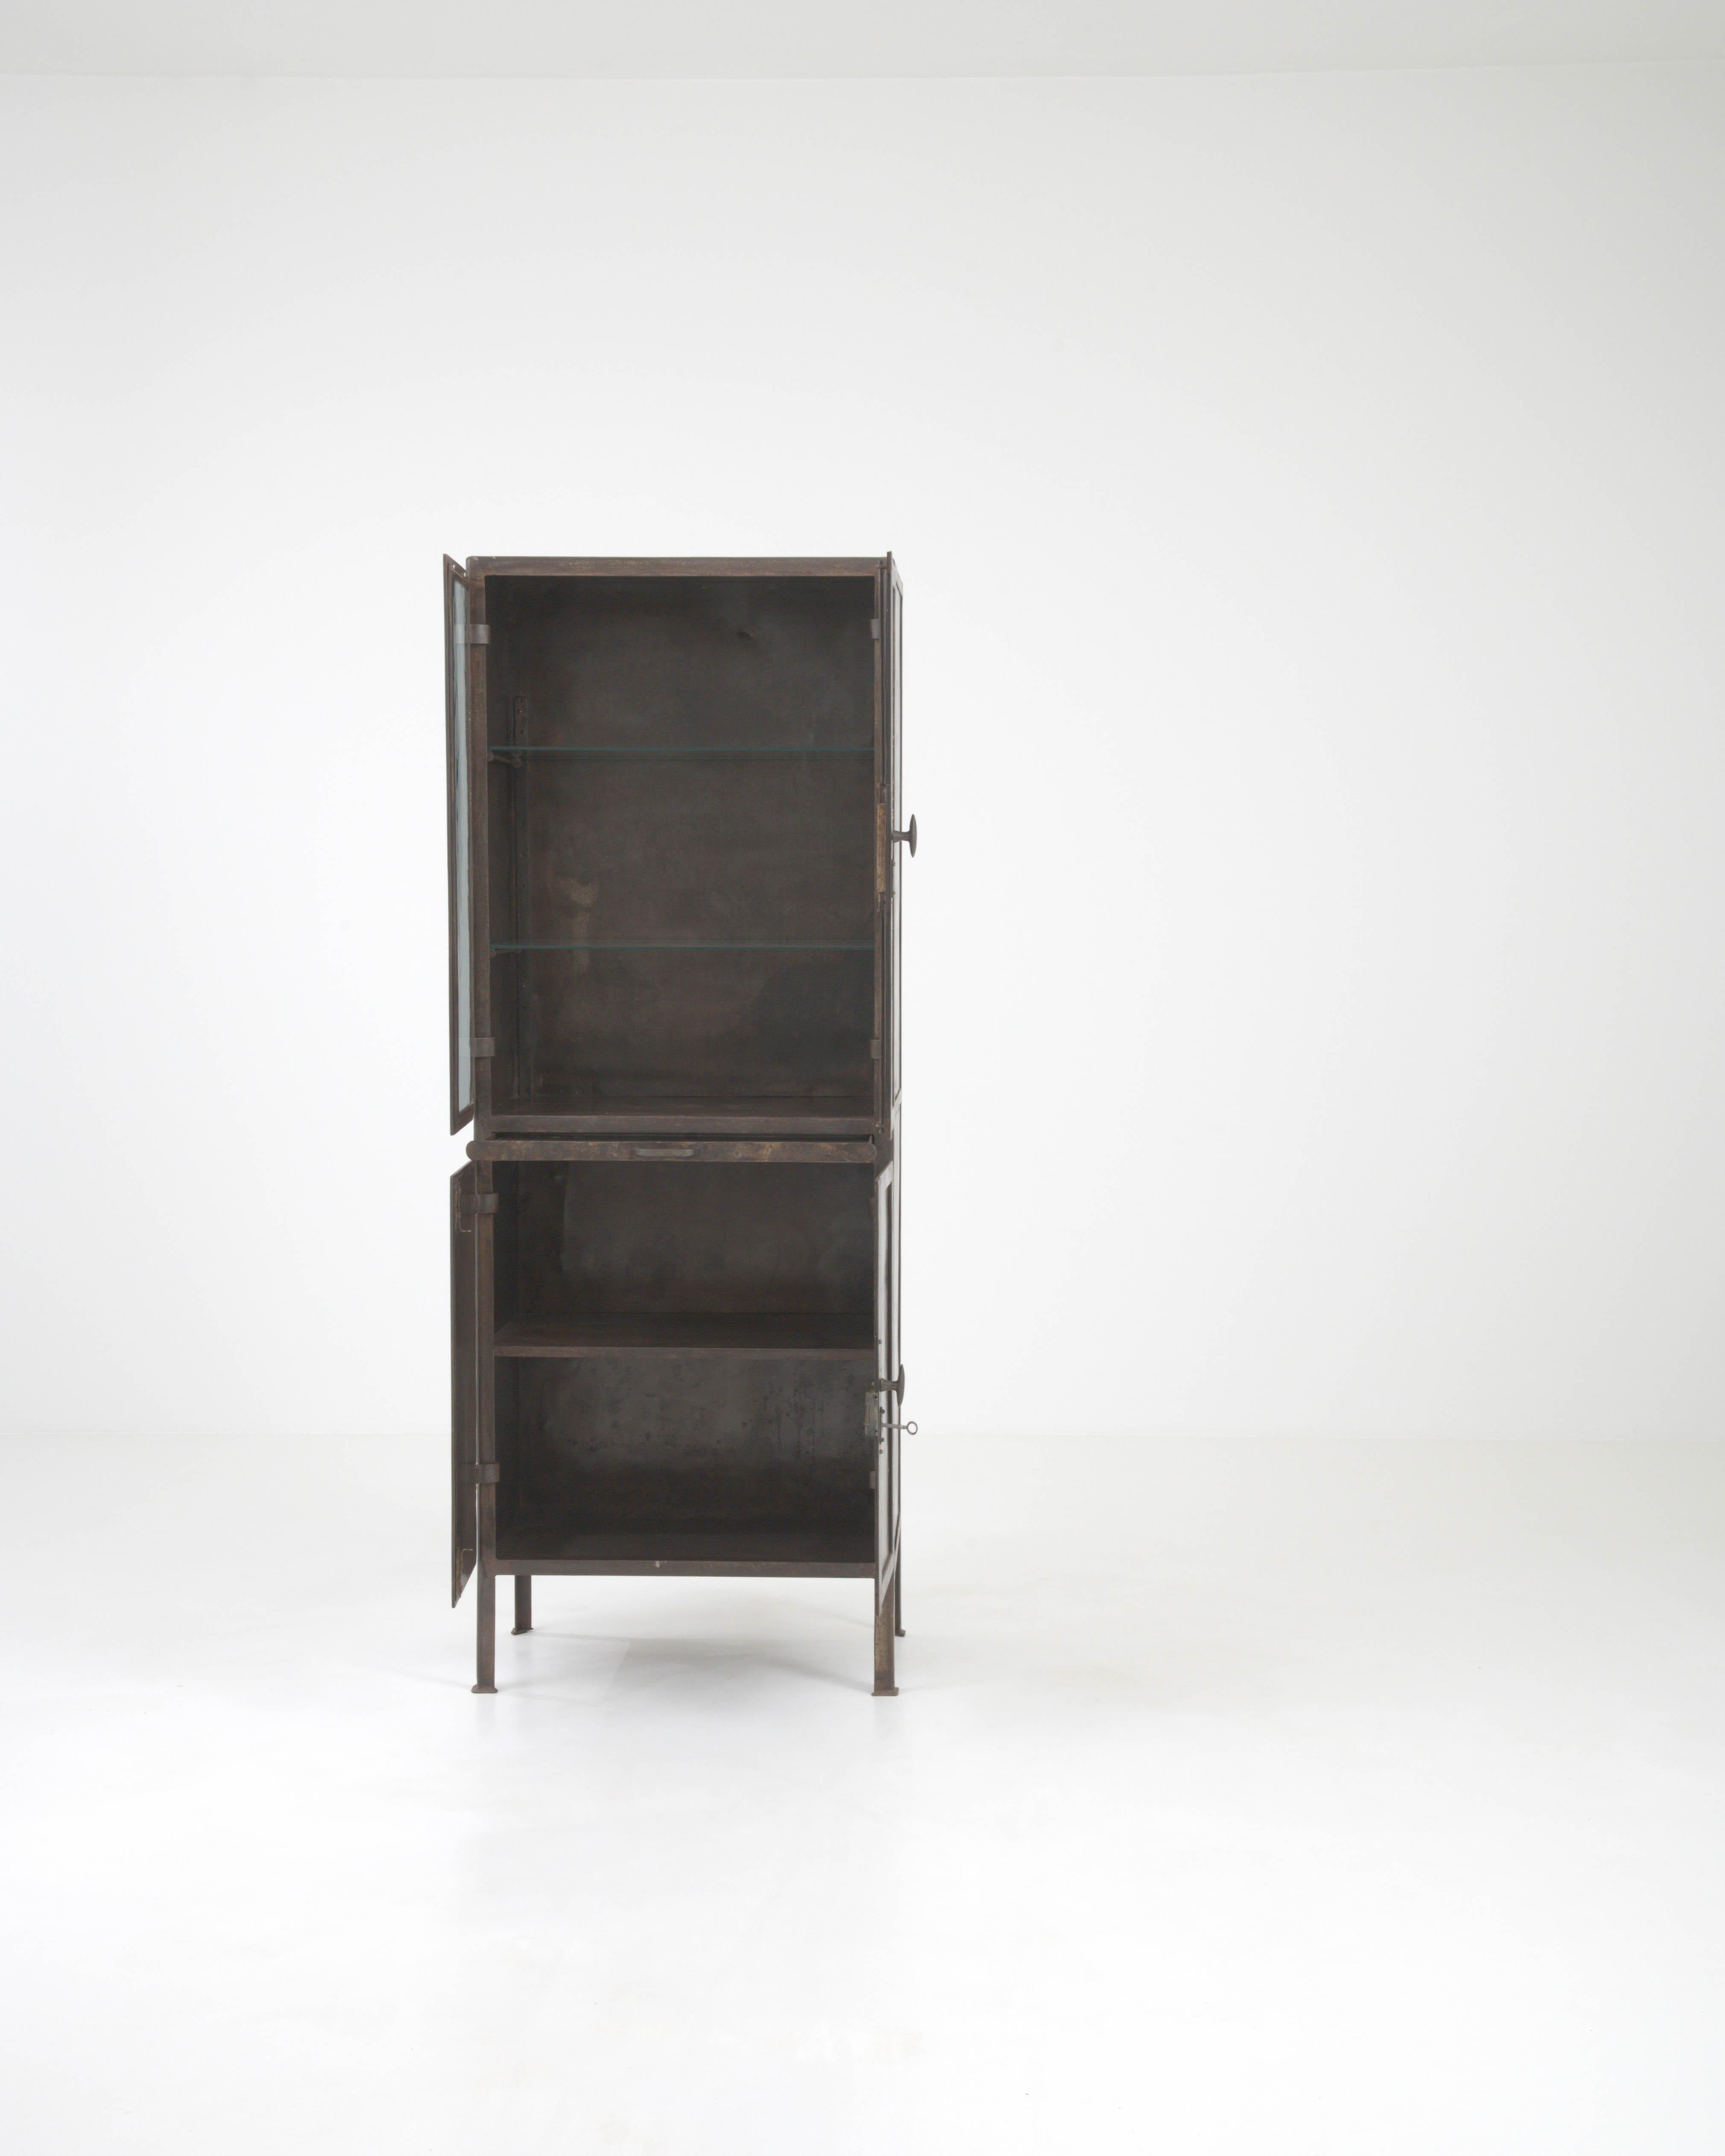 Immerse yourself in the bygone era of French elegance with this Early 20th Century French Metal Vitrine. A true statement piece, this cabinet showcases a rich history with its naturally weathered patina and classic silhouette. Designed to capture